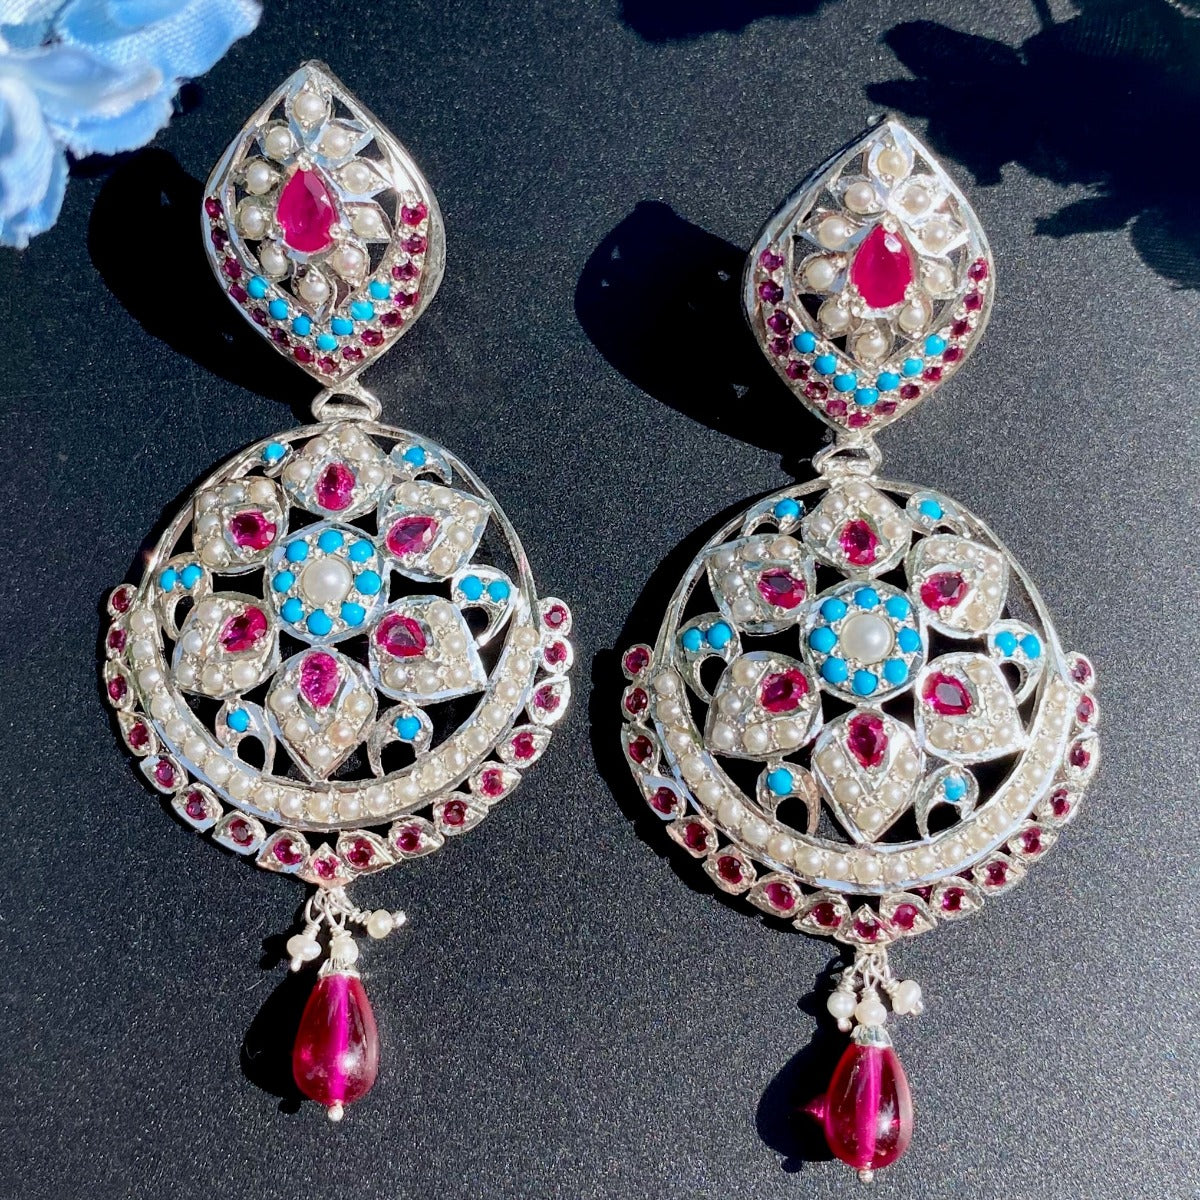 jadau earrings in silver finish without gold plating